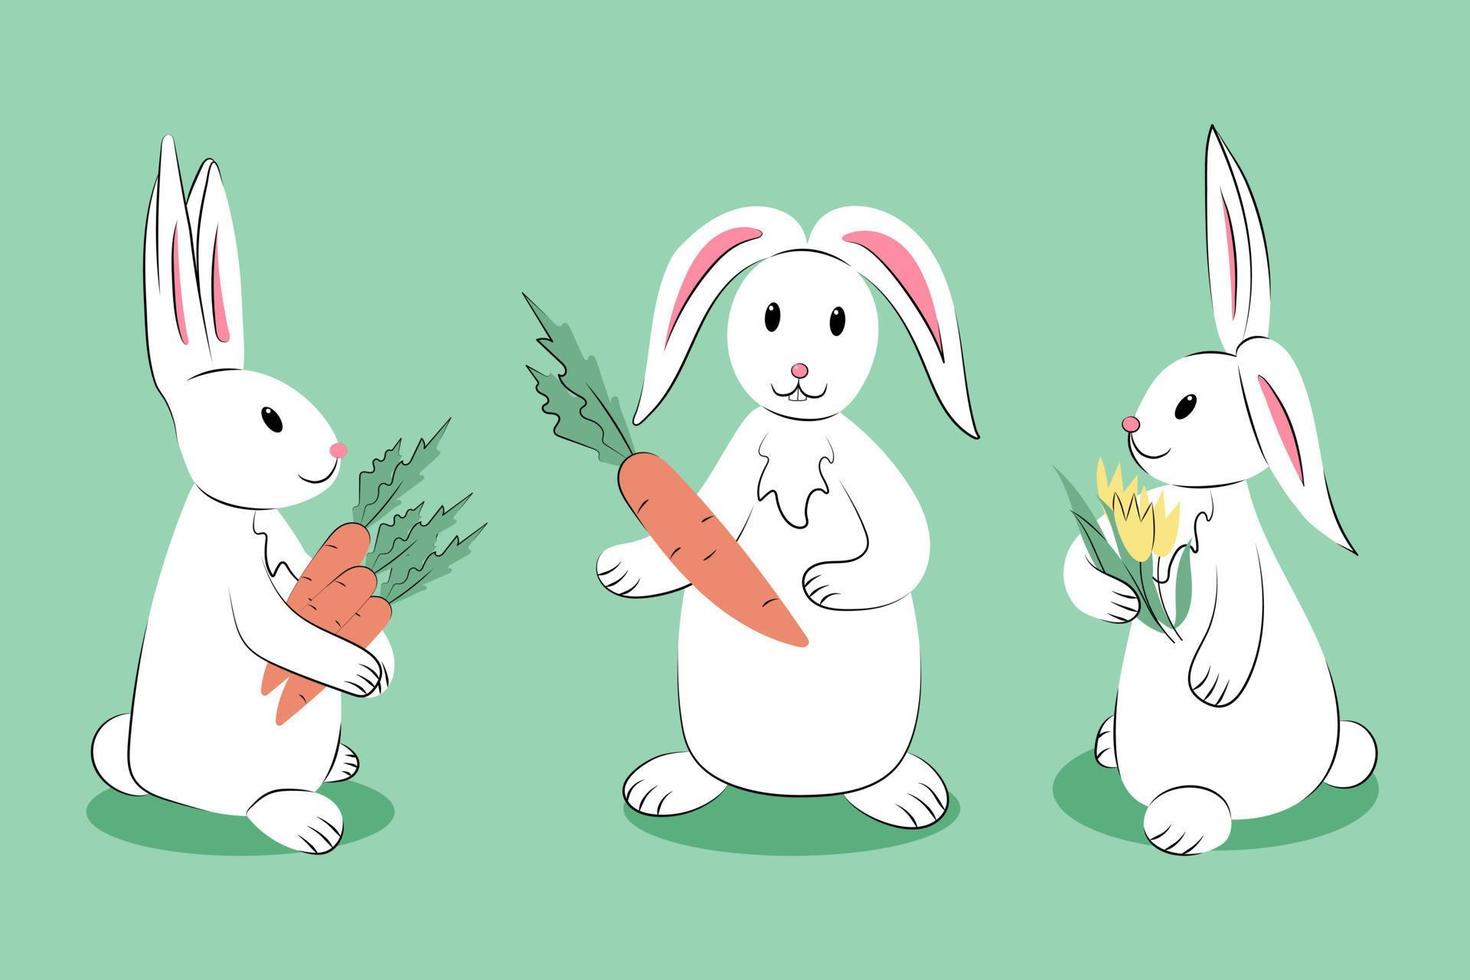 Cute white rabbits with carrots and tulips in paws. Isolated illustration on pastel green background. Cartoon vector characters. Greeting card, poster